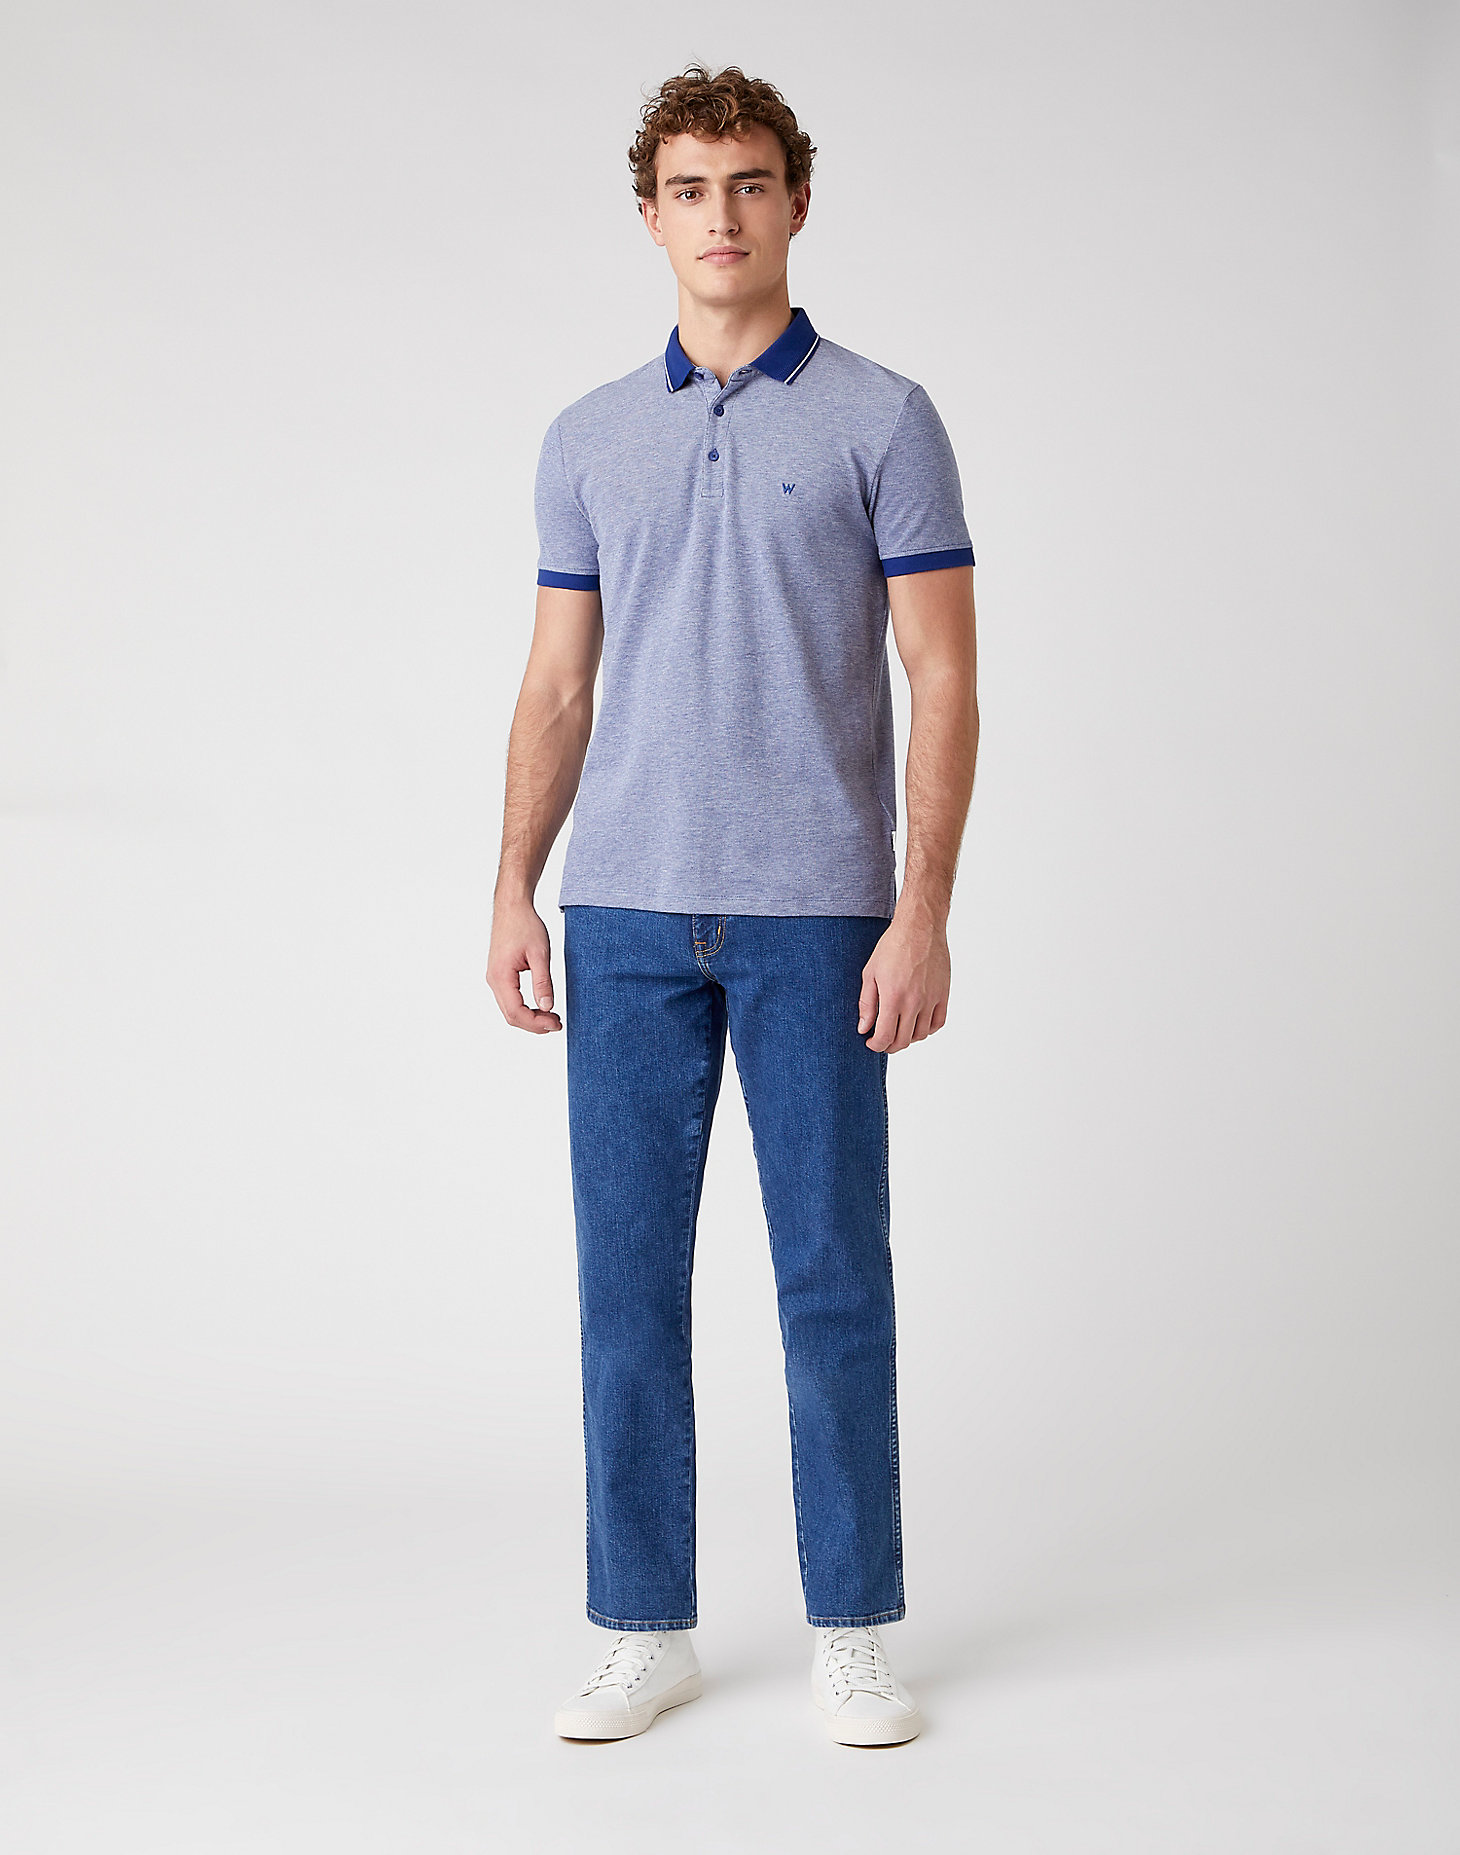 Short Sleeve Refined Polo in Twilight Blue 1 alternative view 4